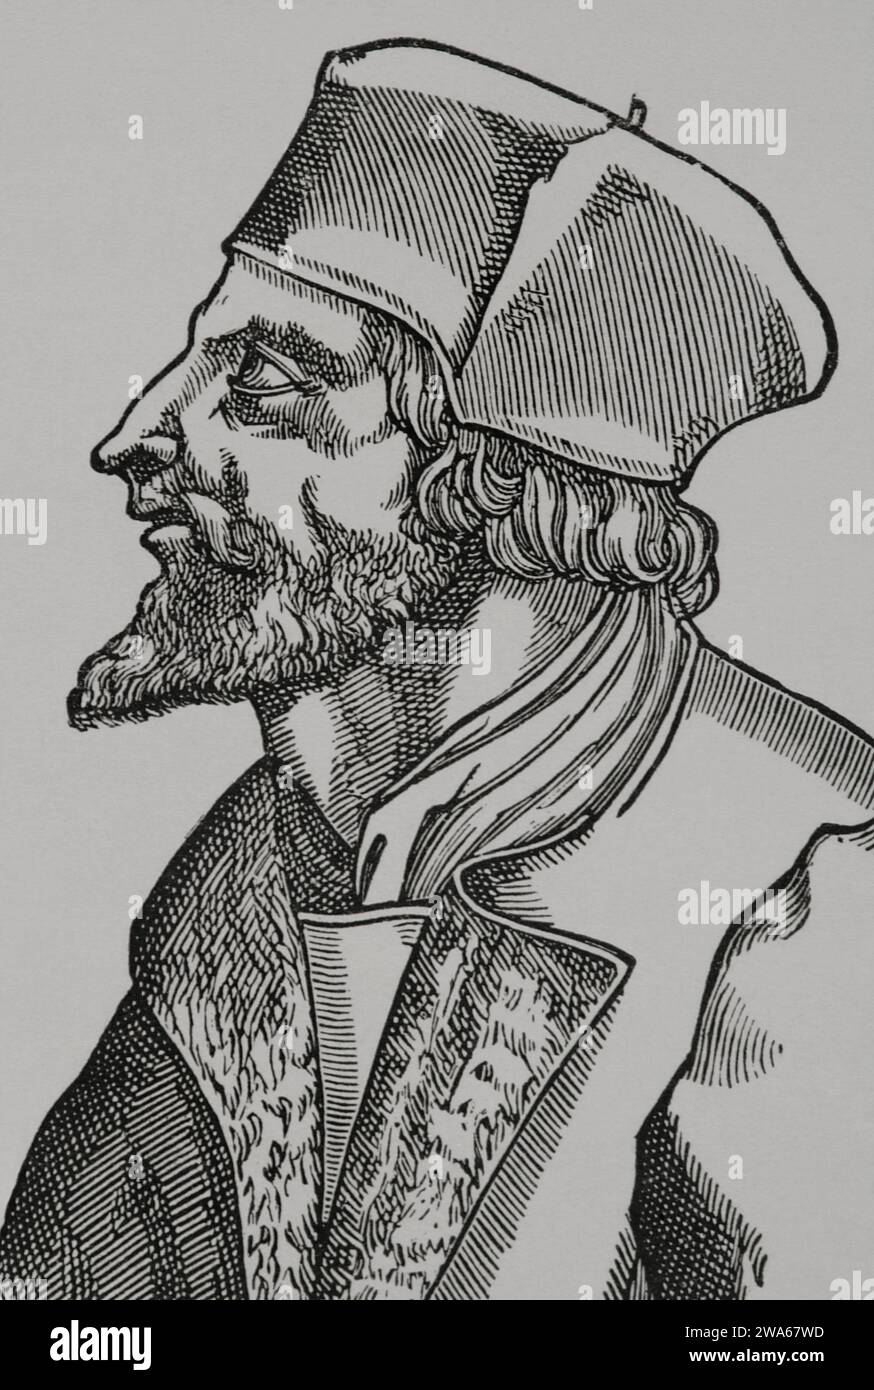 Jan Hus (1369-1415). Czech theologian and philosopher. Reformer excommunicated in 1410 for propagating the doctrines of Wycliffe. In 1414 he attended the Council of Constance, where he was tried and condemned to the stake as a heretic. This unleashed the Hussite uprising (1419-1434), antecedent of the Wars of Religion. Portrait. Engraving. 'Vie Militaire et Religieuse au Moyen Age et a l'Epoque de la Renaissance'. Paris, 1877. Stock Photo